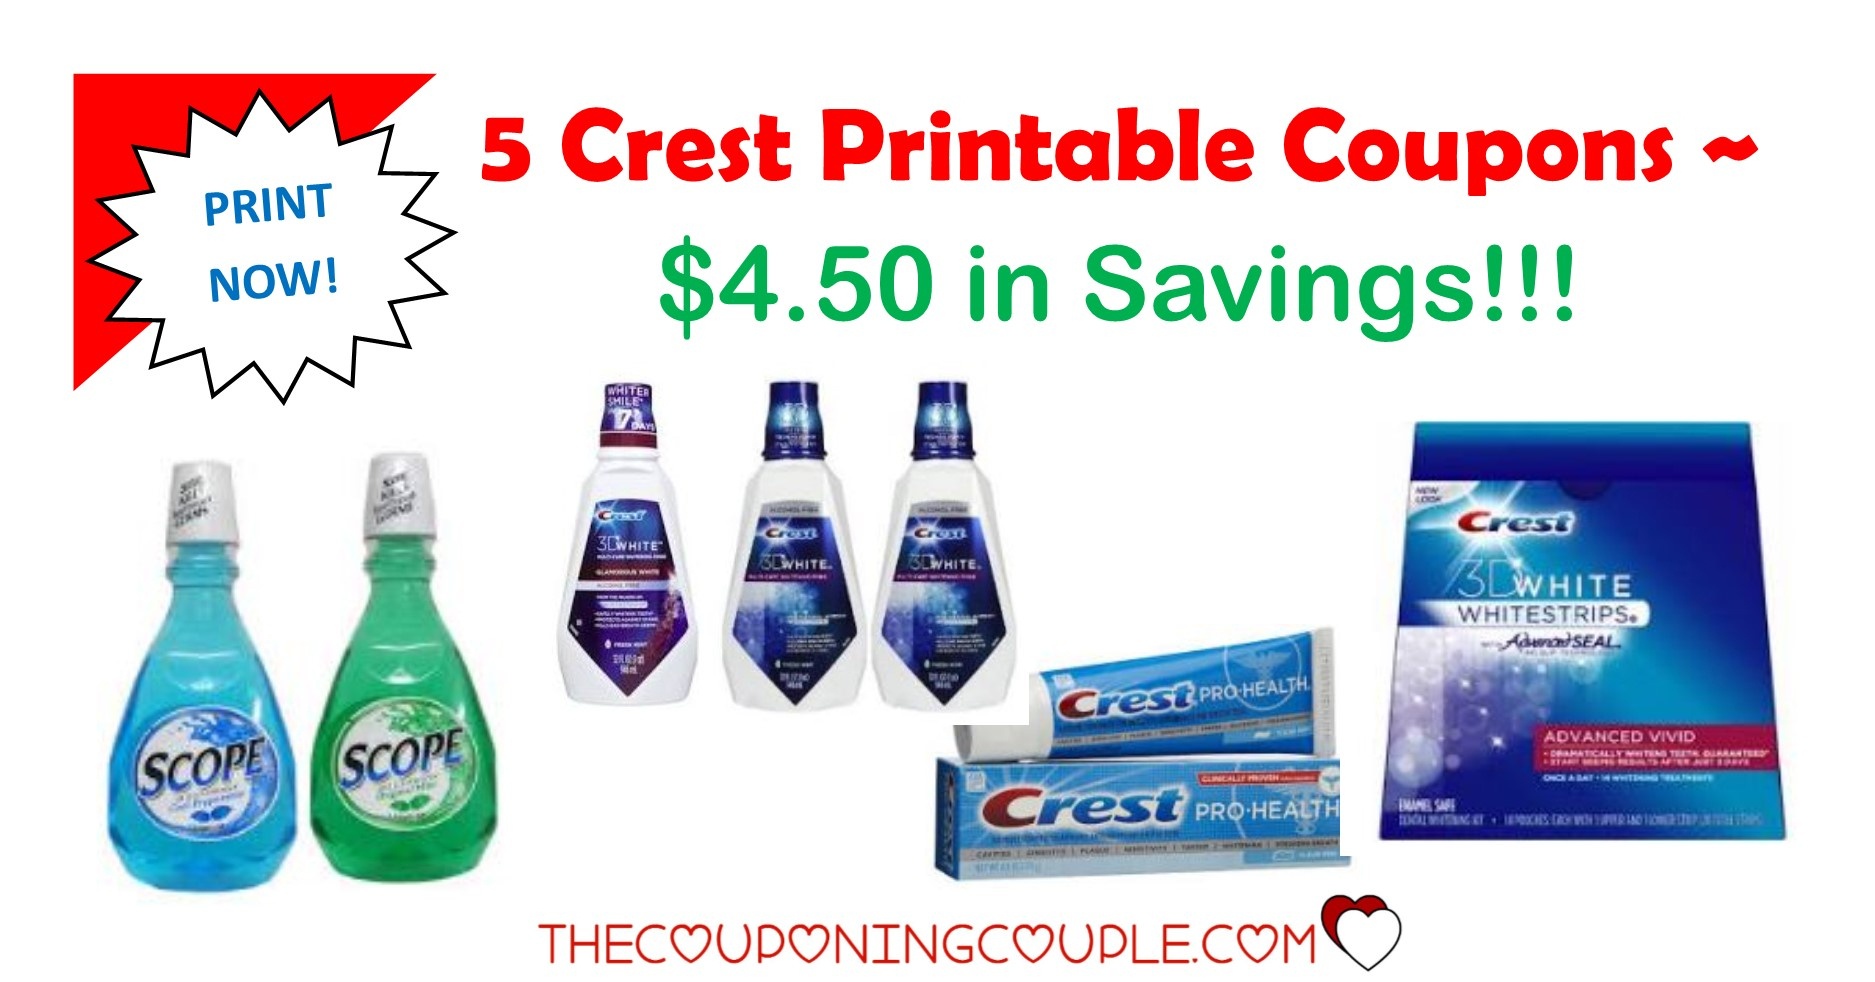 5 Crest Printable Coupons ~ $4.50 In Savings! Print Now!! - Free Printable Crest Coupons